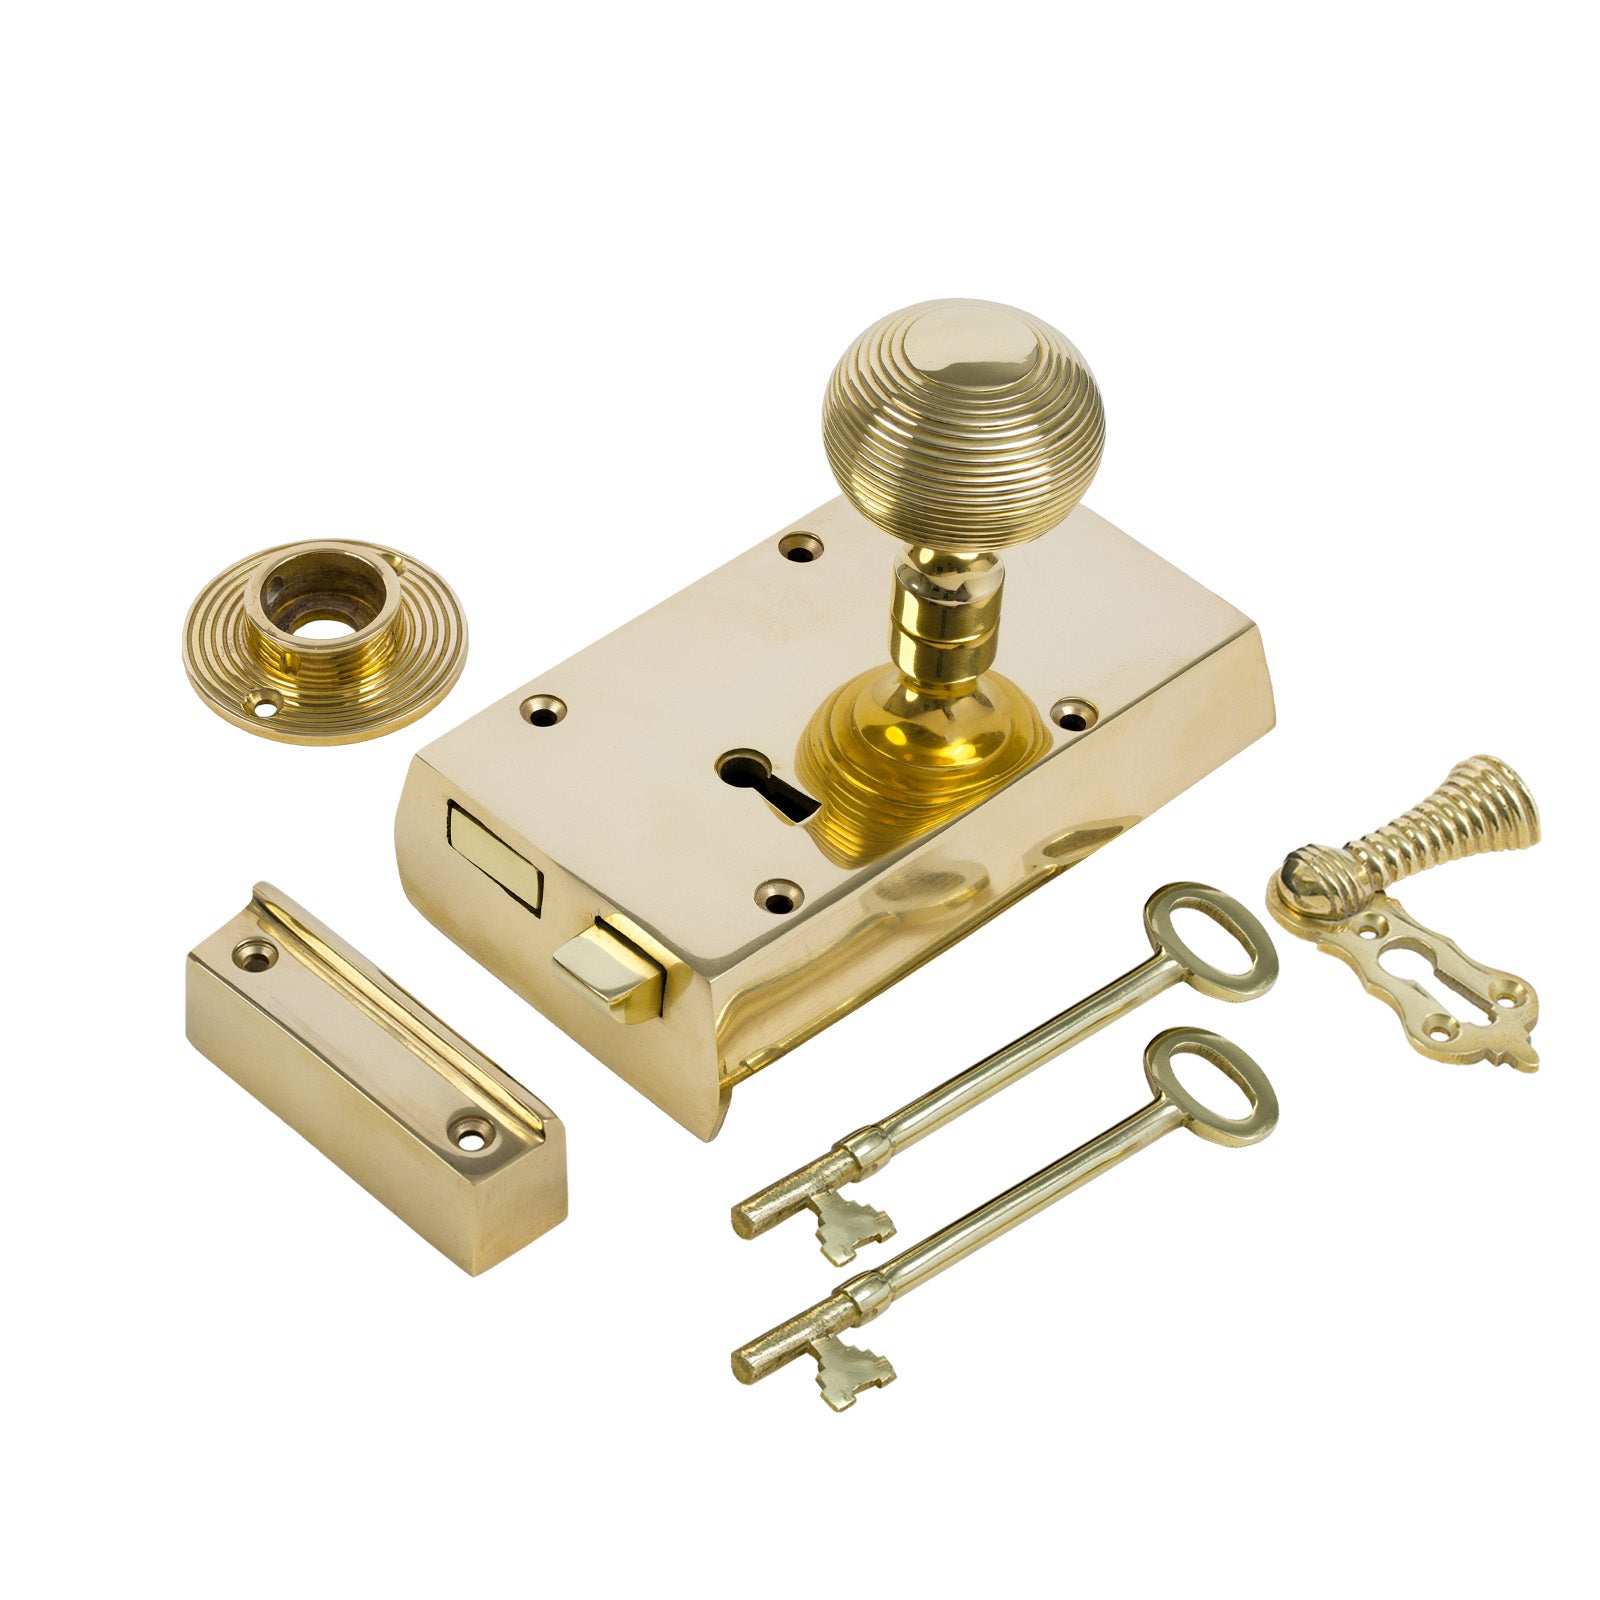 SHOW Right Handed Small Brass Rim Lock with Brass Beehive Door Knob Set